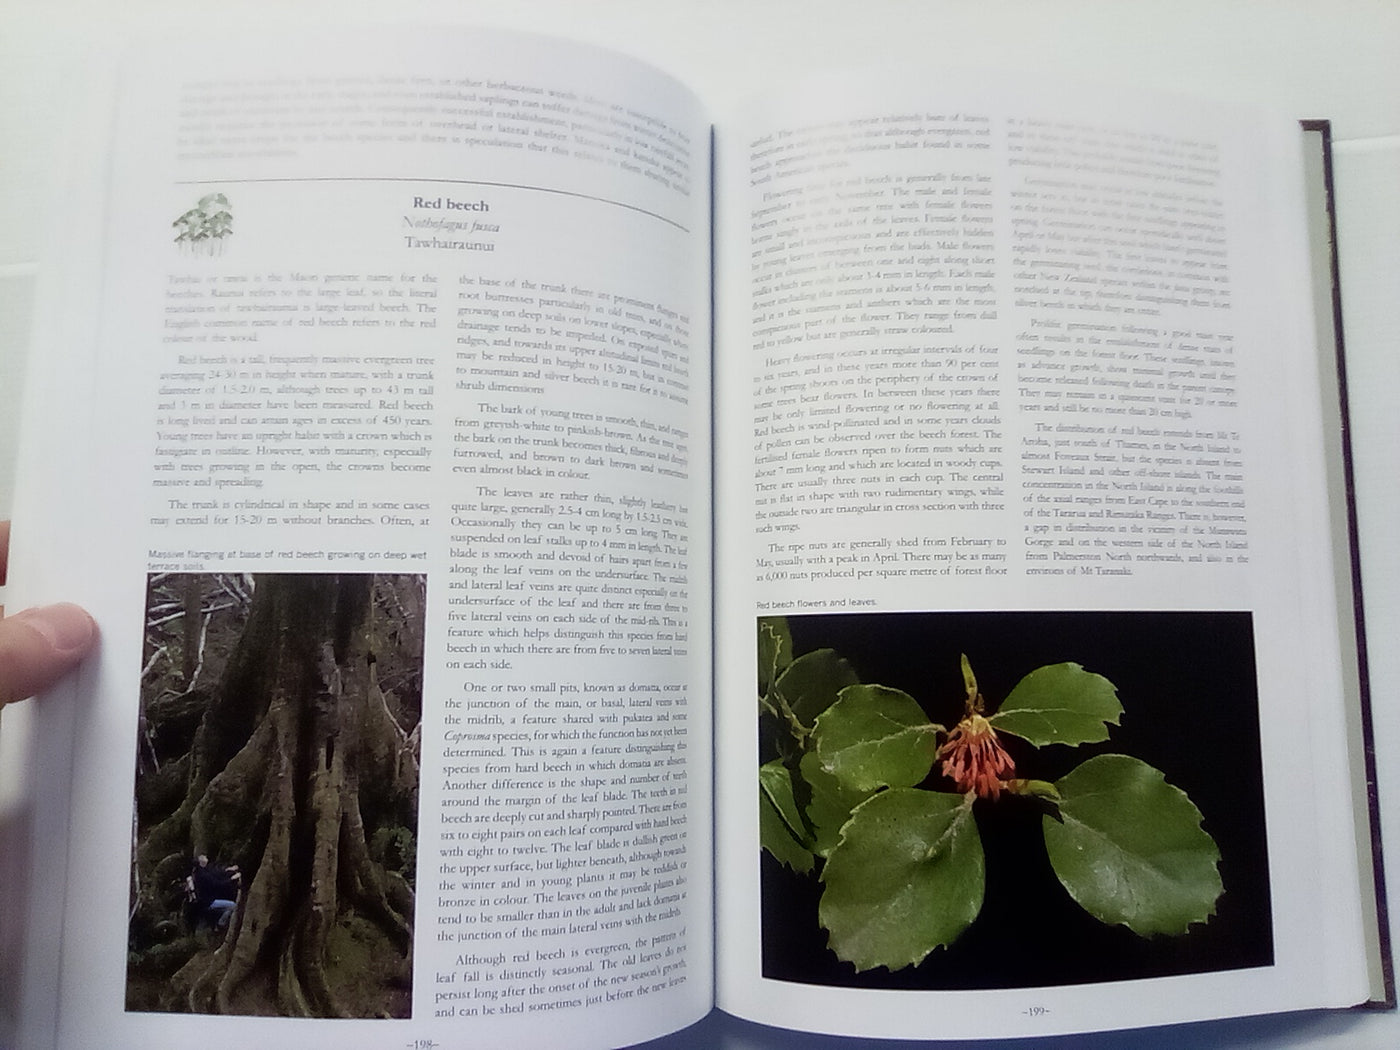 Wardle's Native Trees of New Zealand and Their Story by John Wardle